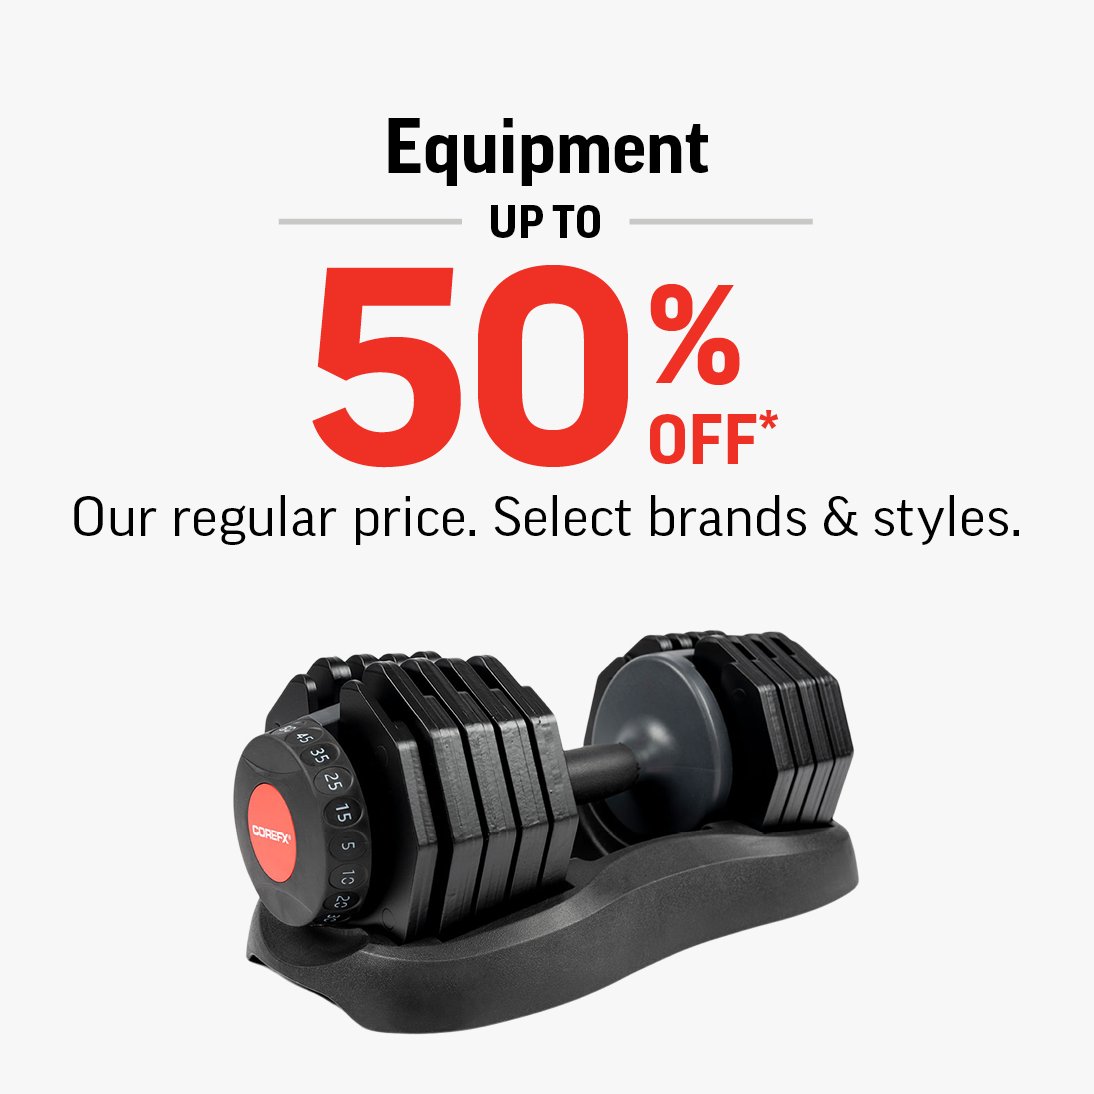 EQUIPMENT UP TO 50% OFF